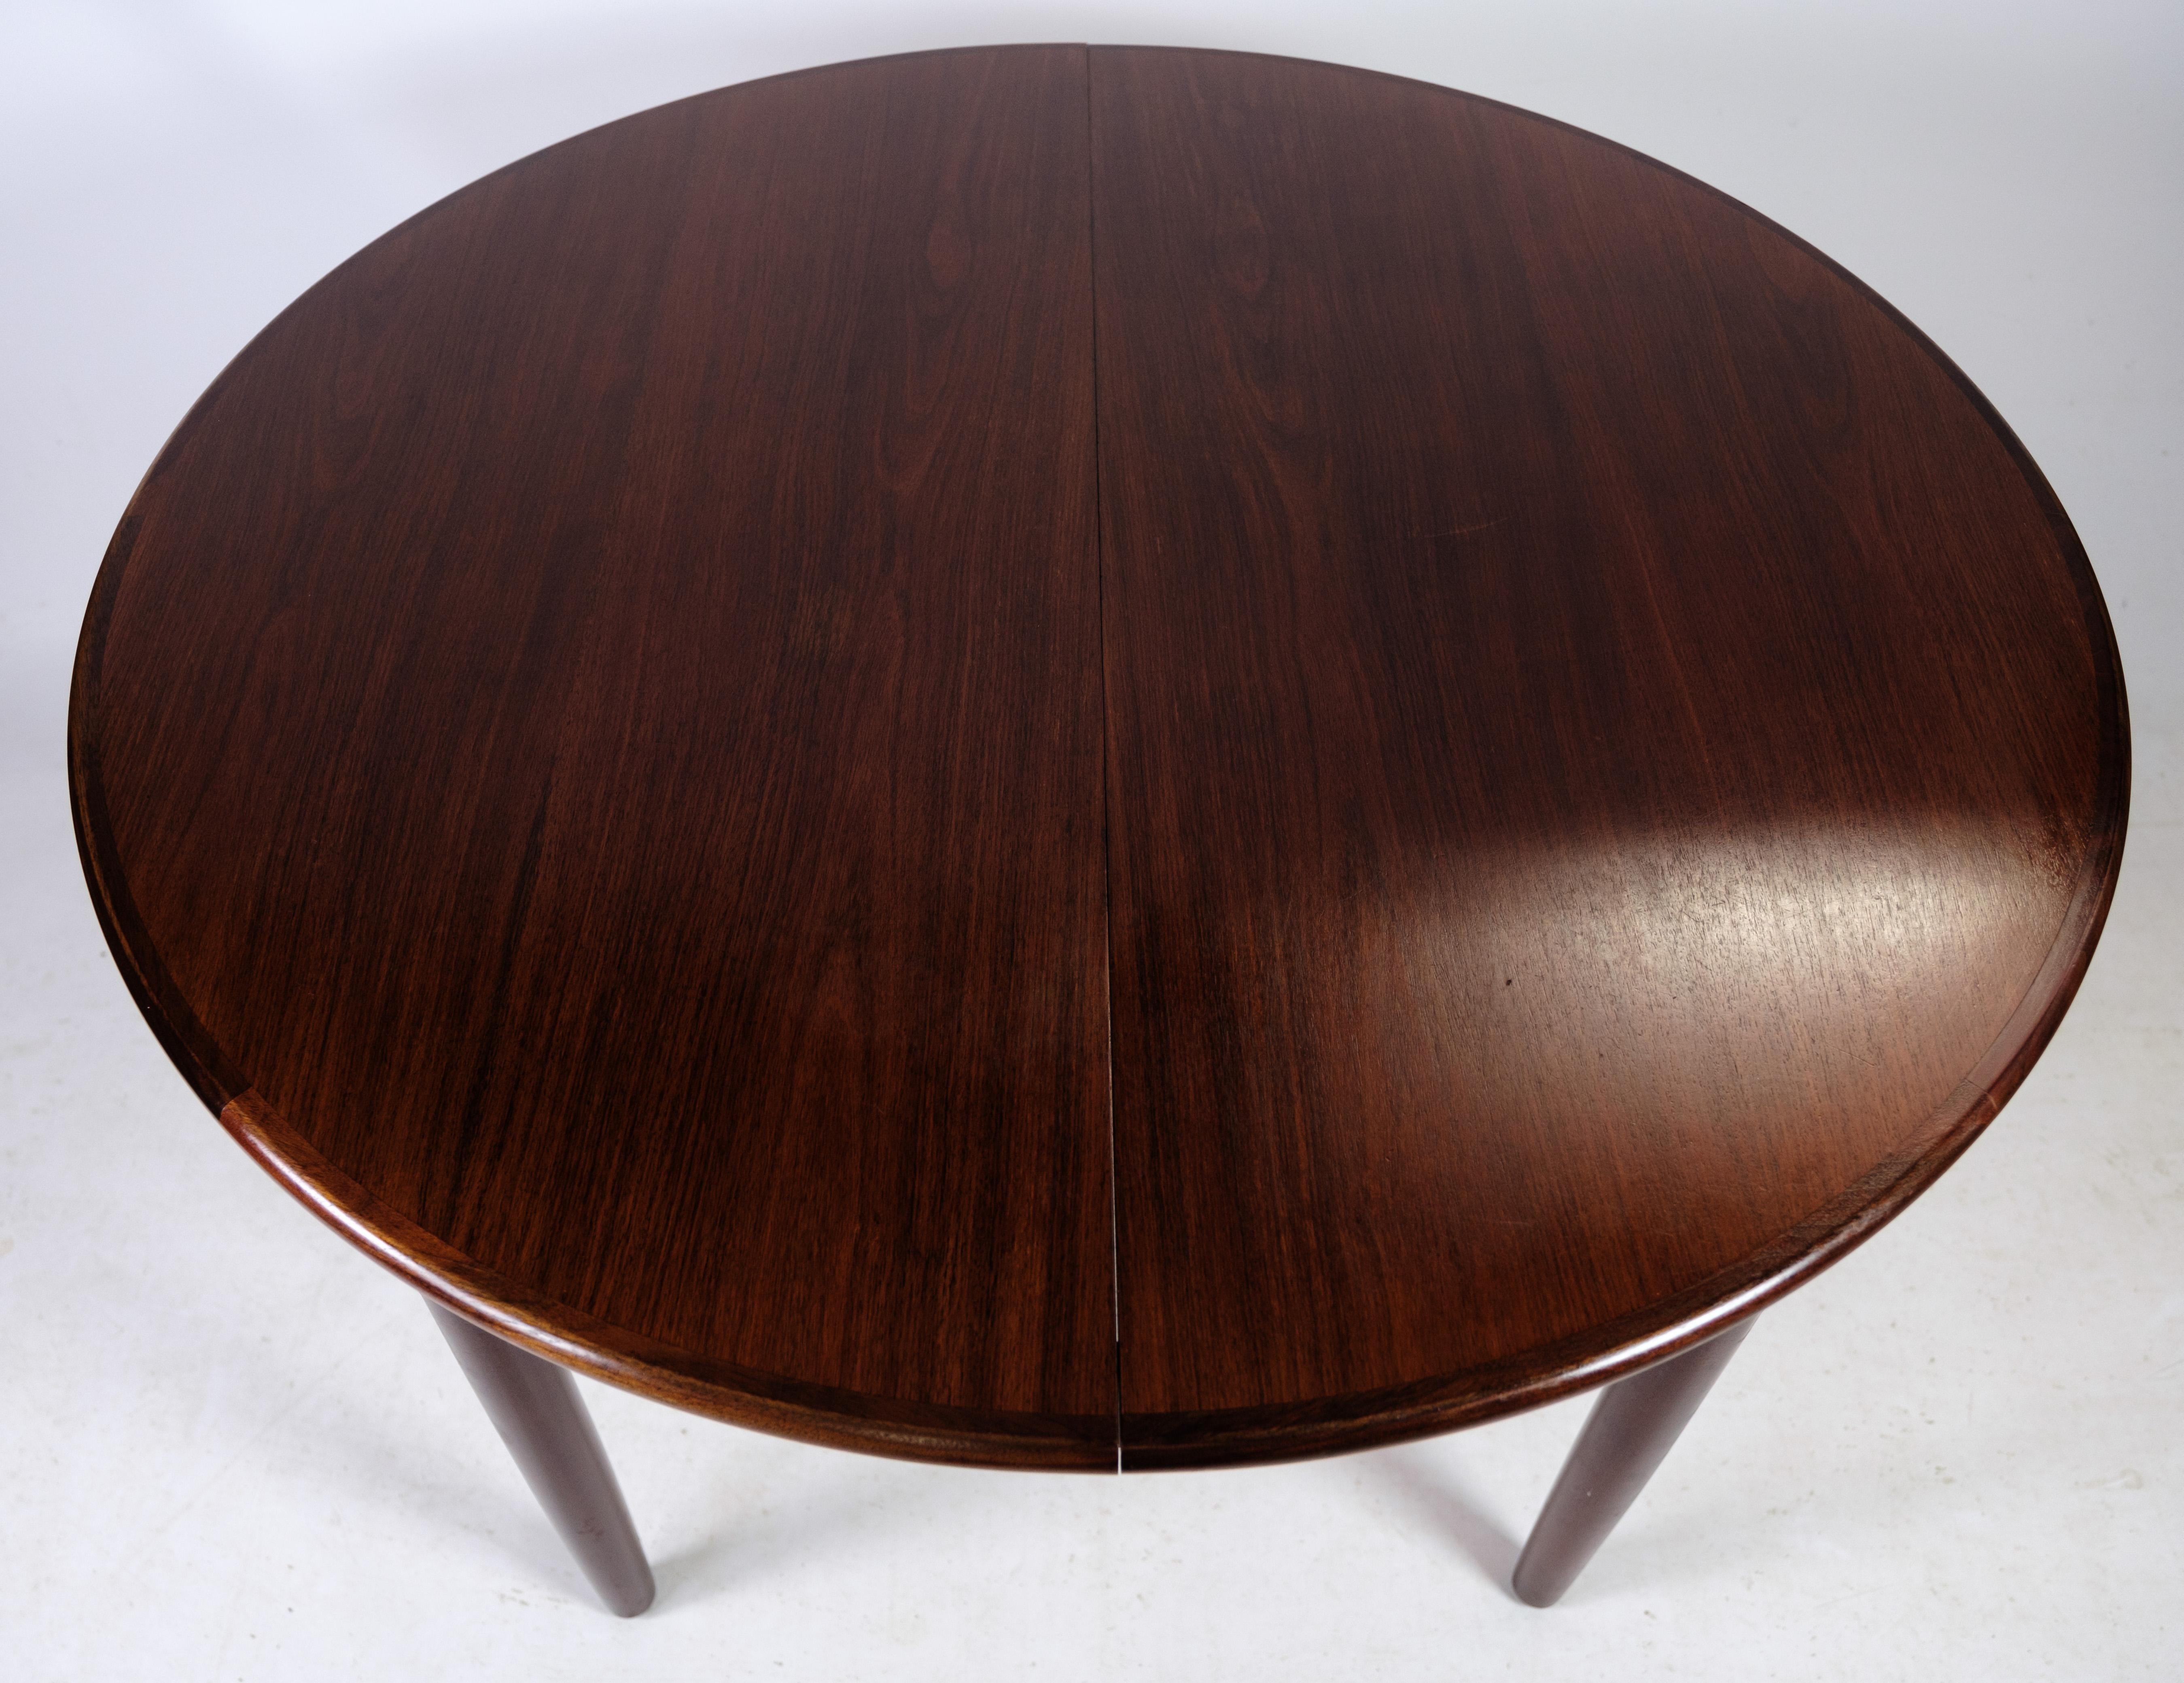 
This dining table, crafted from rosewood and bearing the unmistakable hallmarks of Danish design, originates from the 1960s. With its rich tones and sleek lines, it embodies the elegance and sophistication characteristic of mid-century Danish